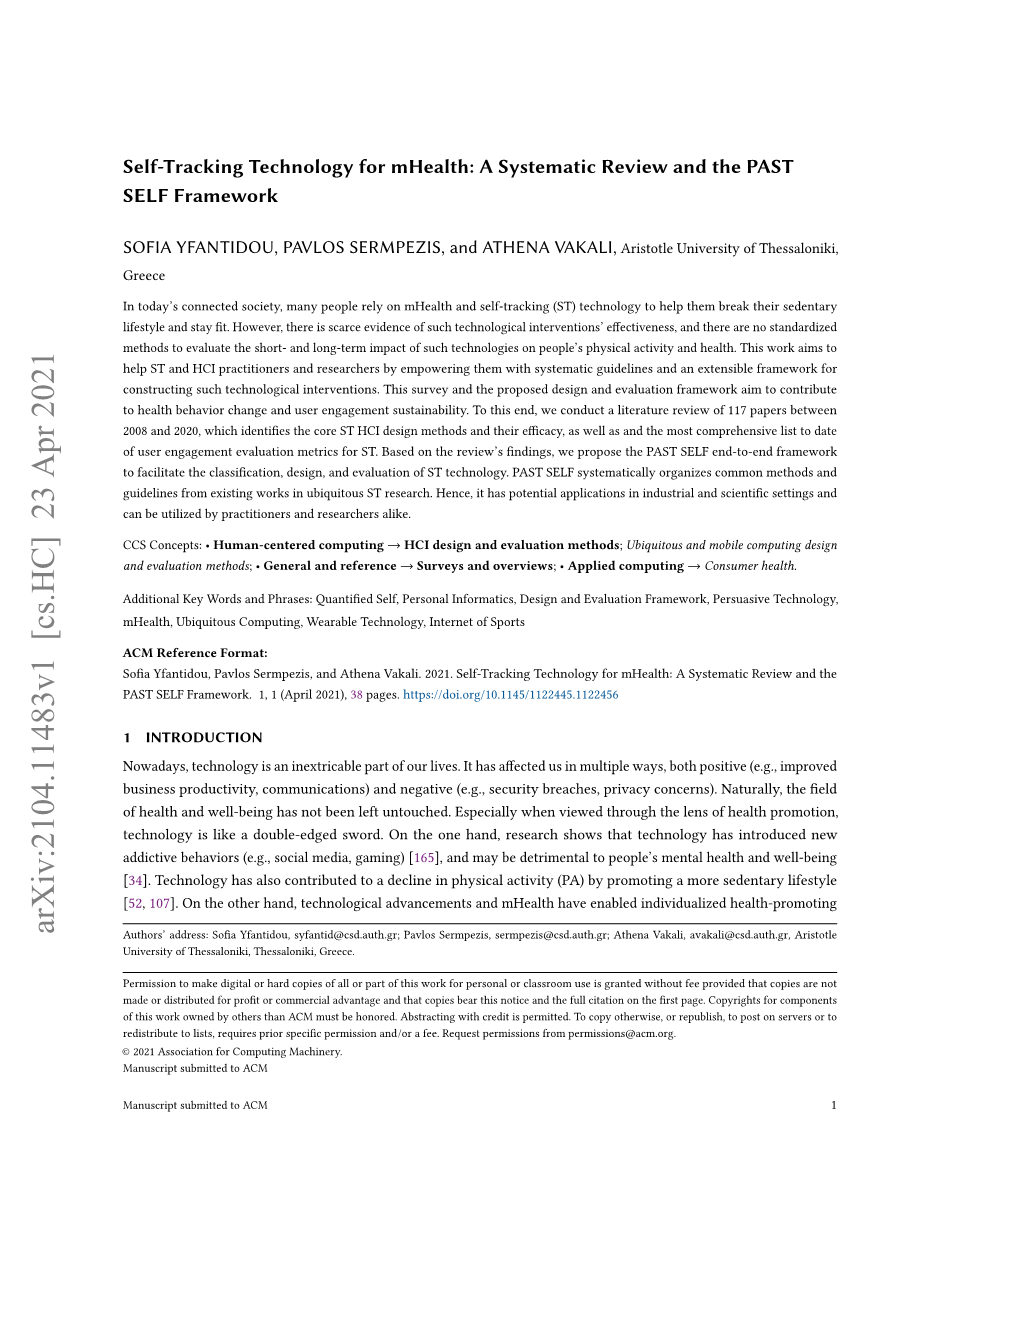 Self-Tracking Technology for Mhealth: a Systematic Review and the PAST SELF Framework